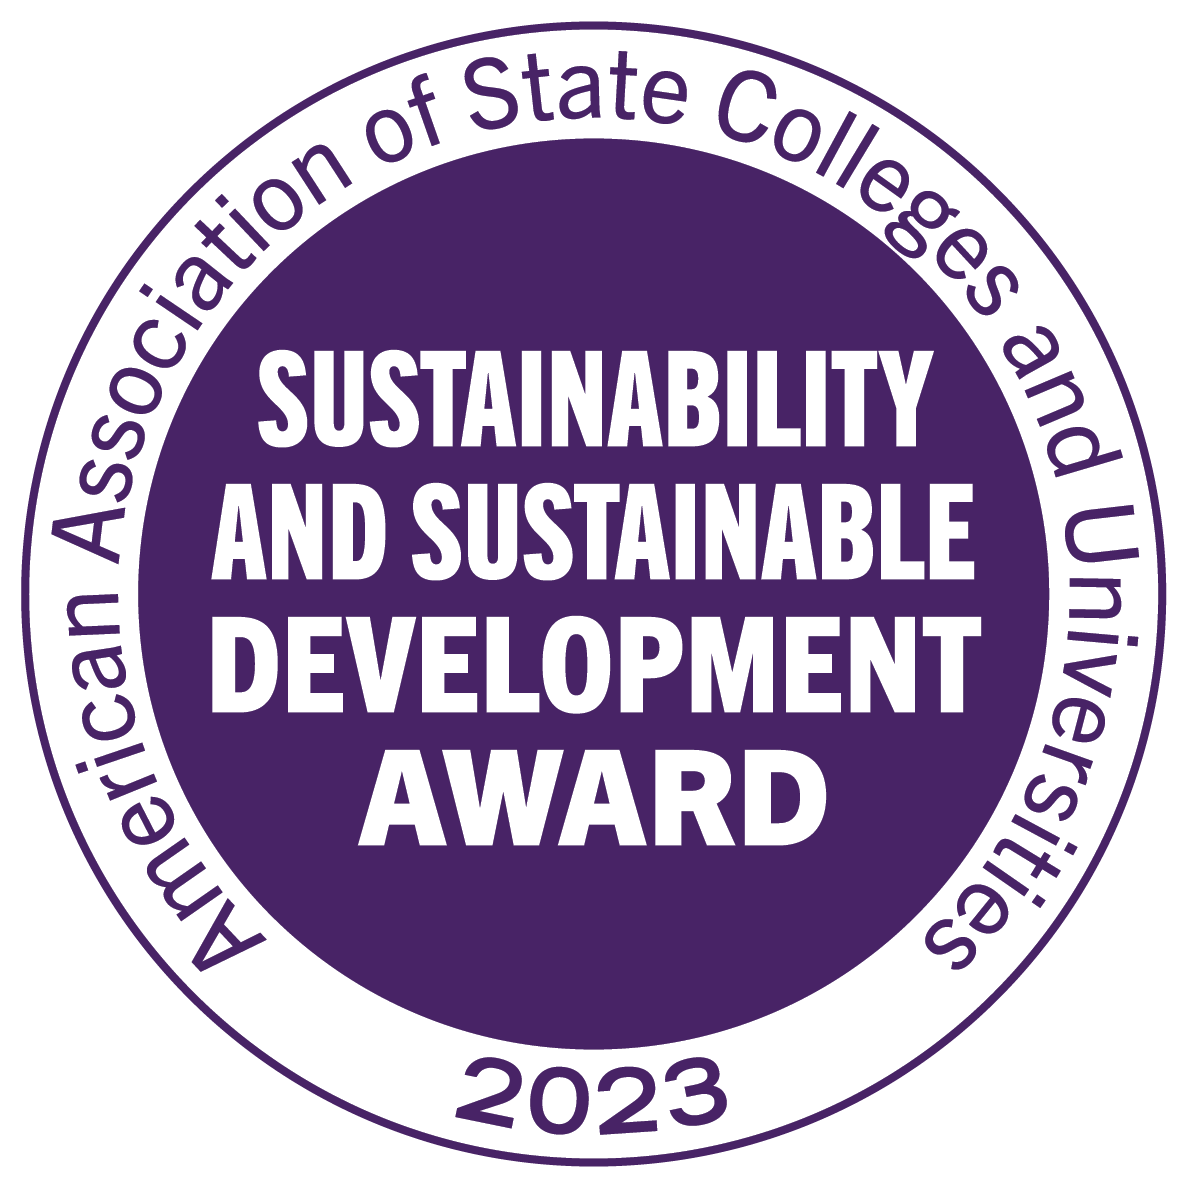 Sustainability and Sustainable Development Award (2023) from the American Association of State Colleges and Universities